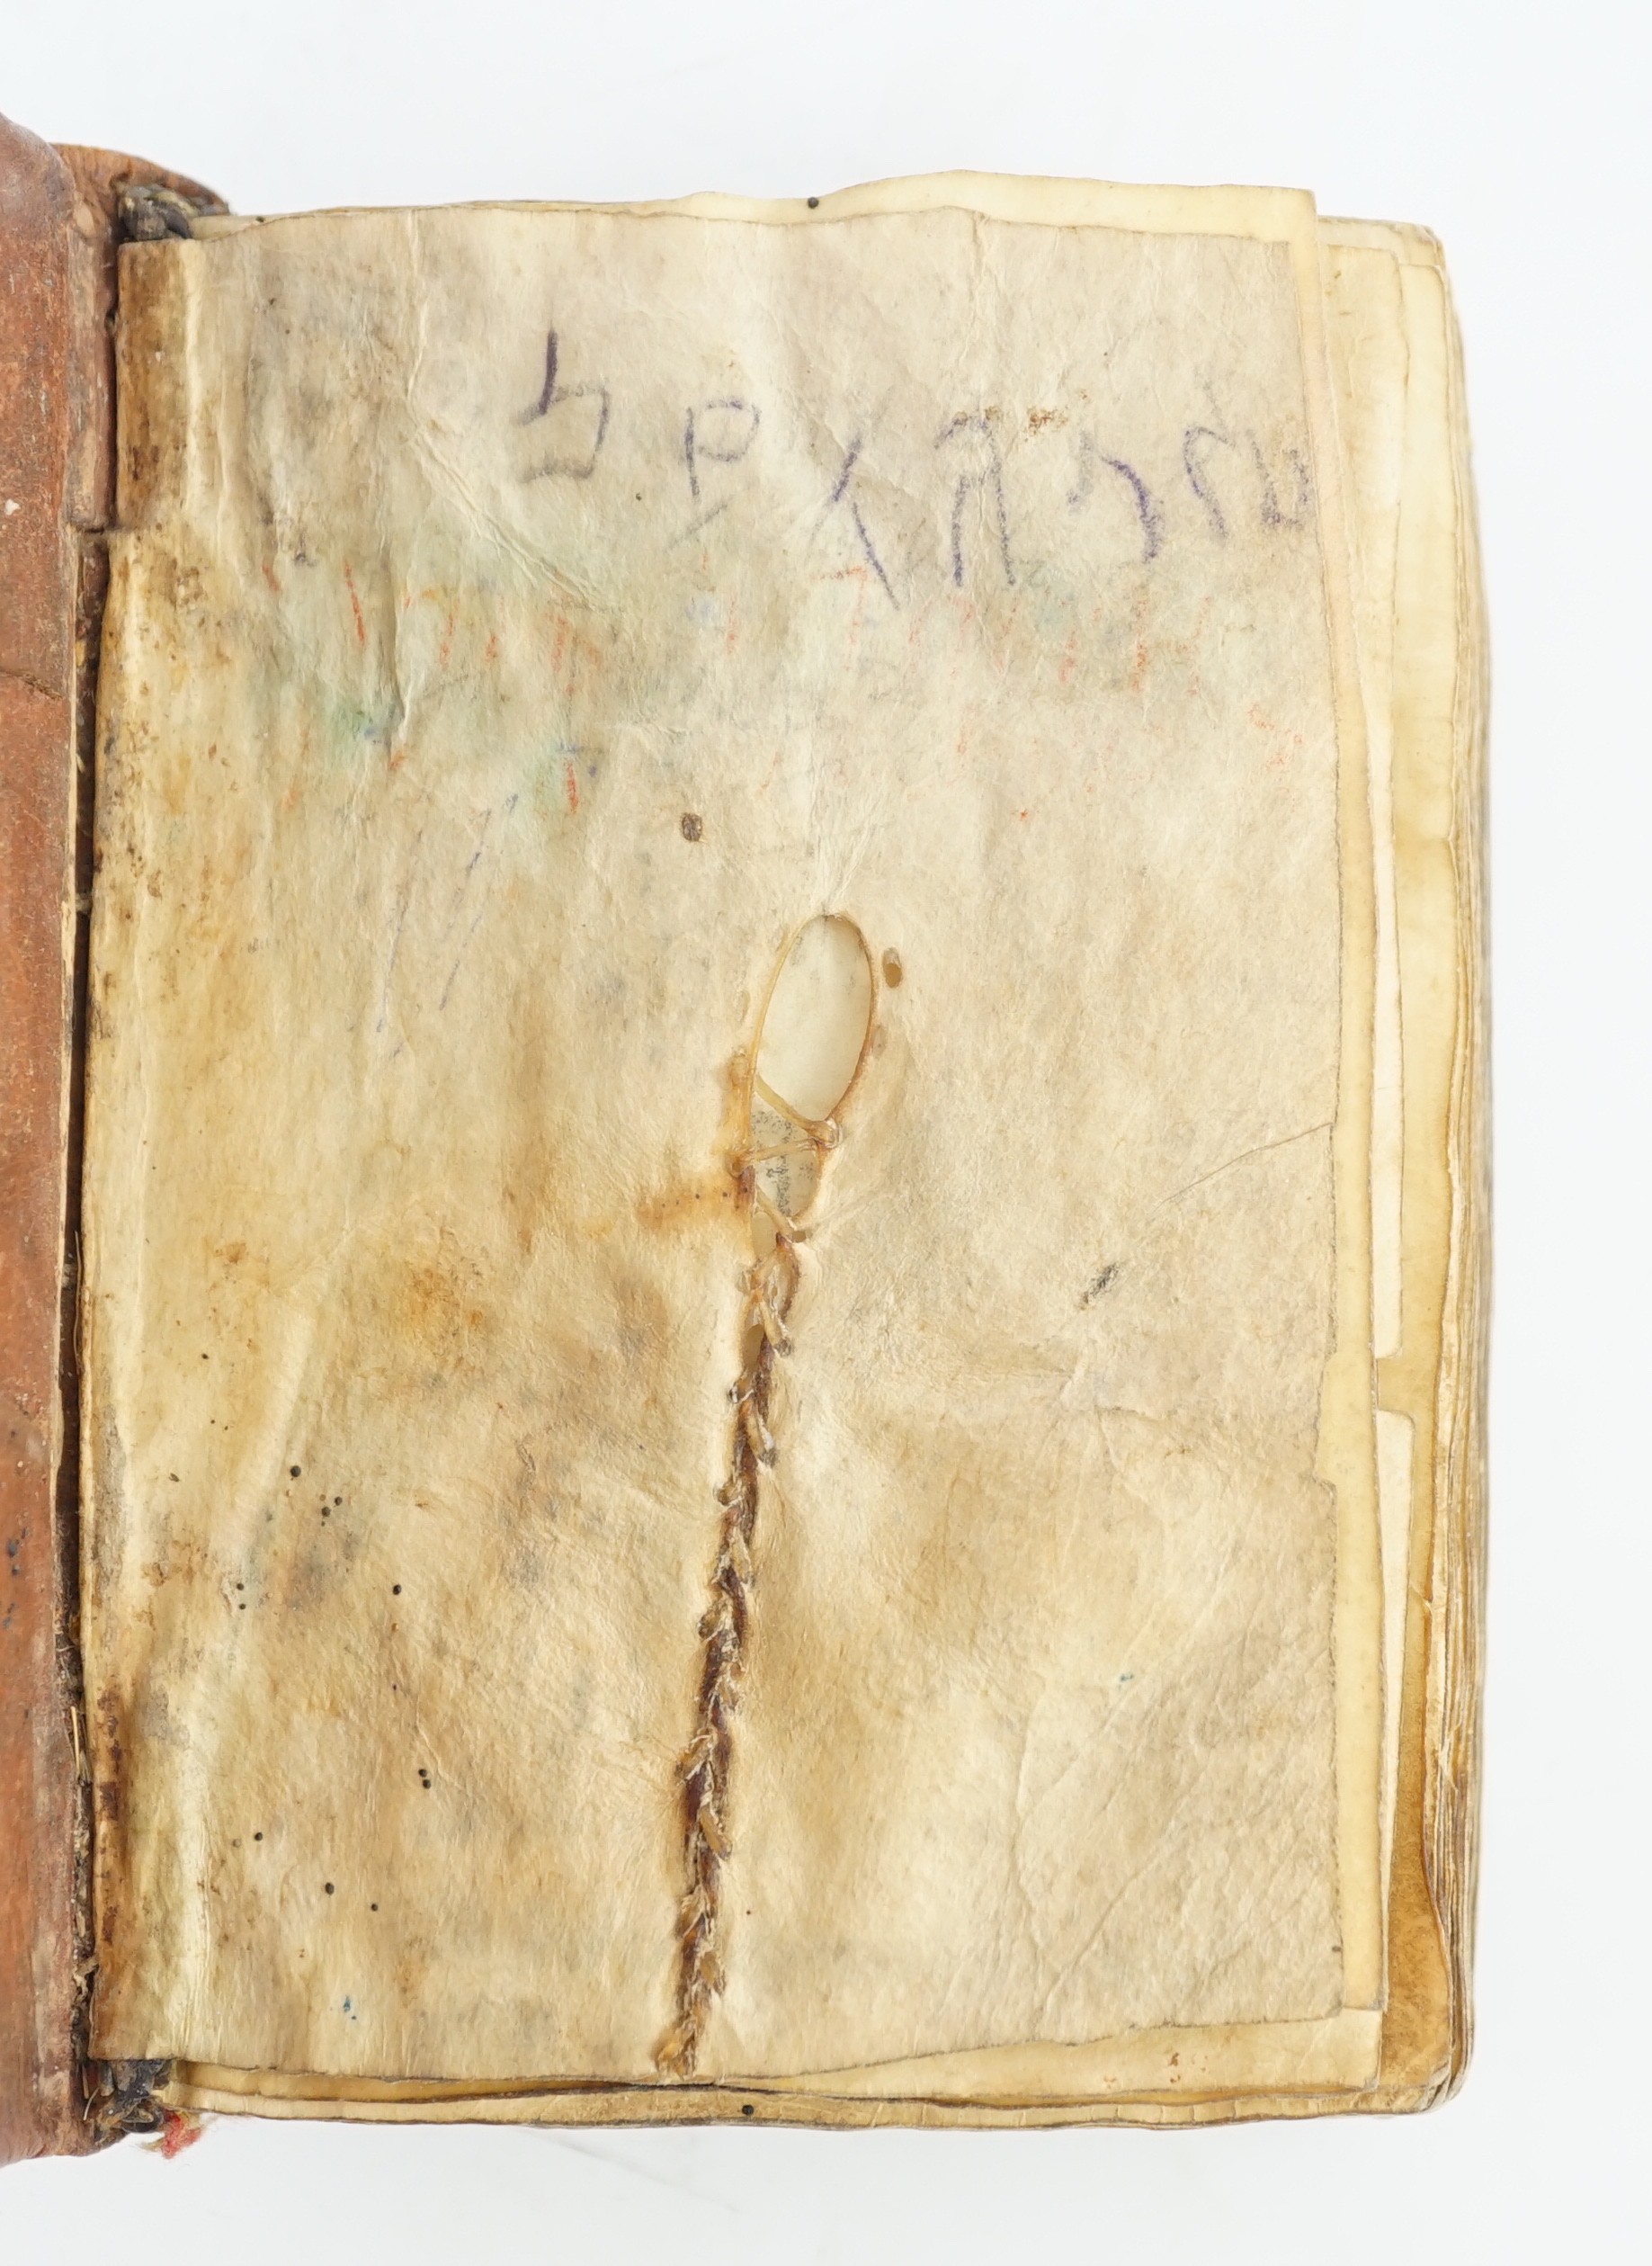 [Eithiopic Coptic Church text, (?) Gospel Book] 86ff., printed on parchment.